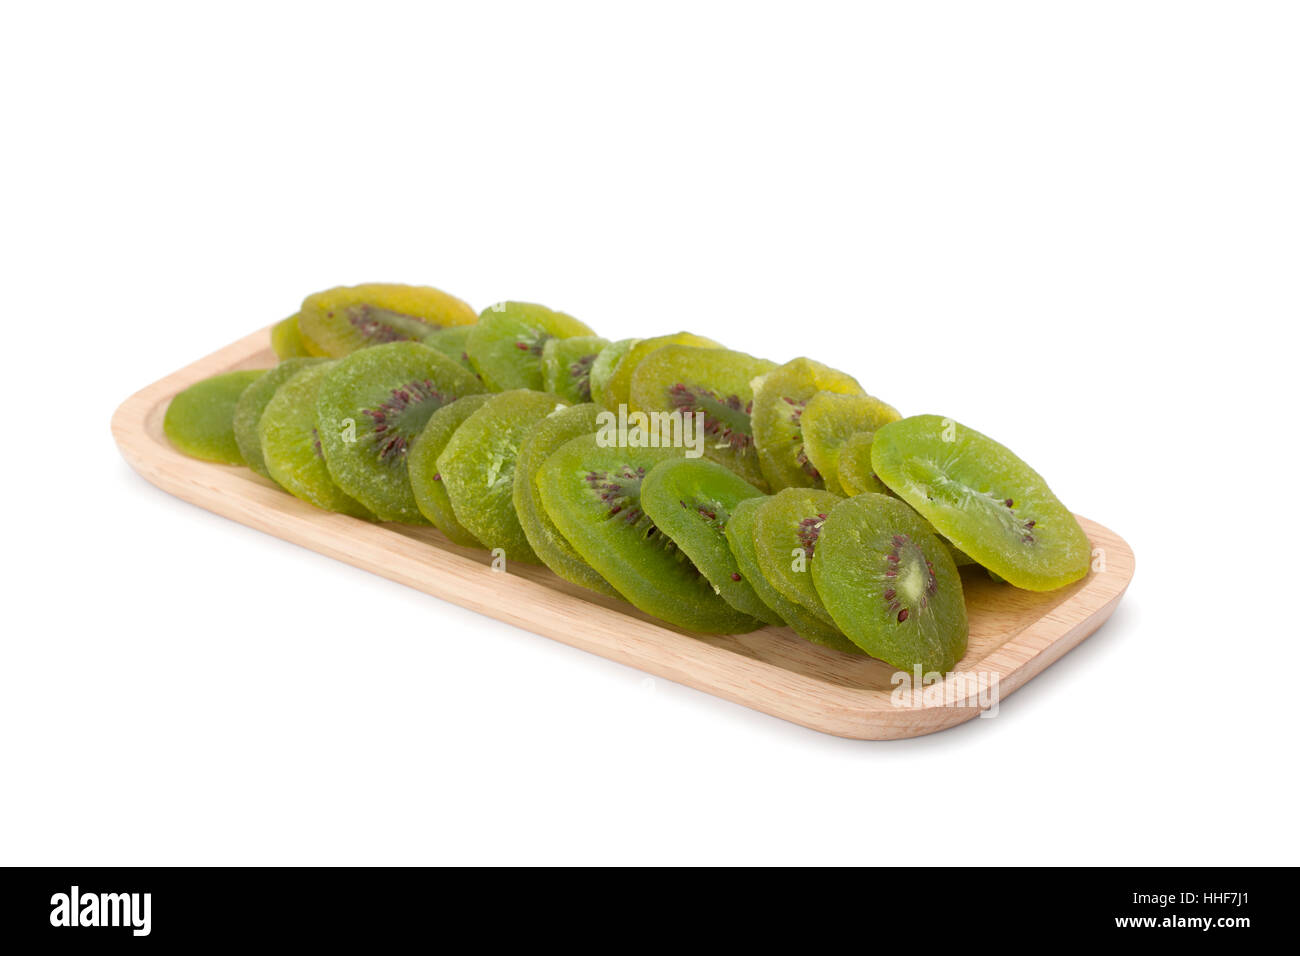 kiwi dried fruit in woodenware isolated on white background with clipping path Stock Photo